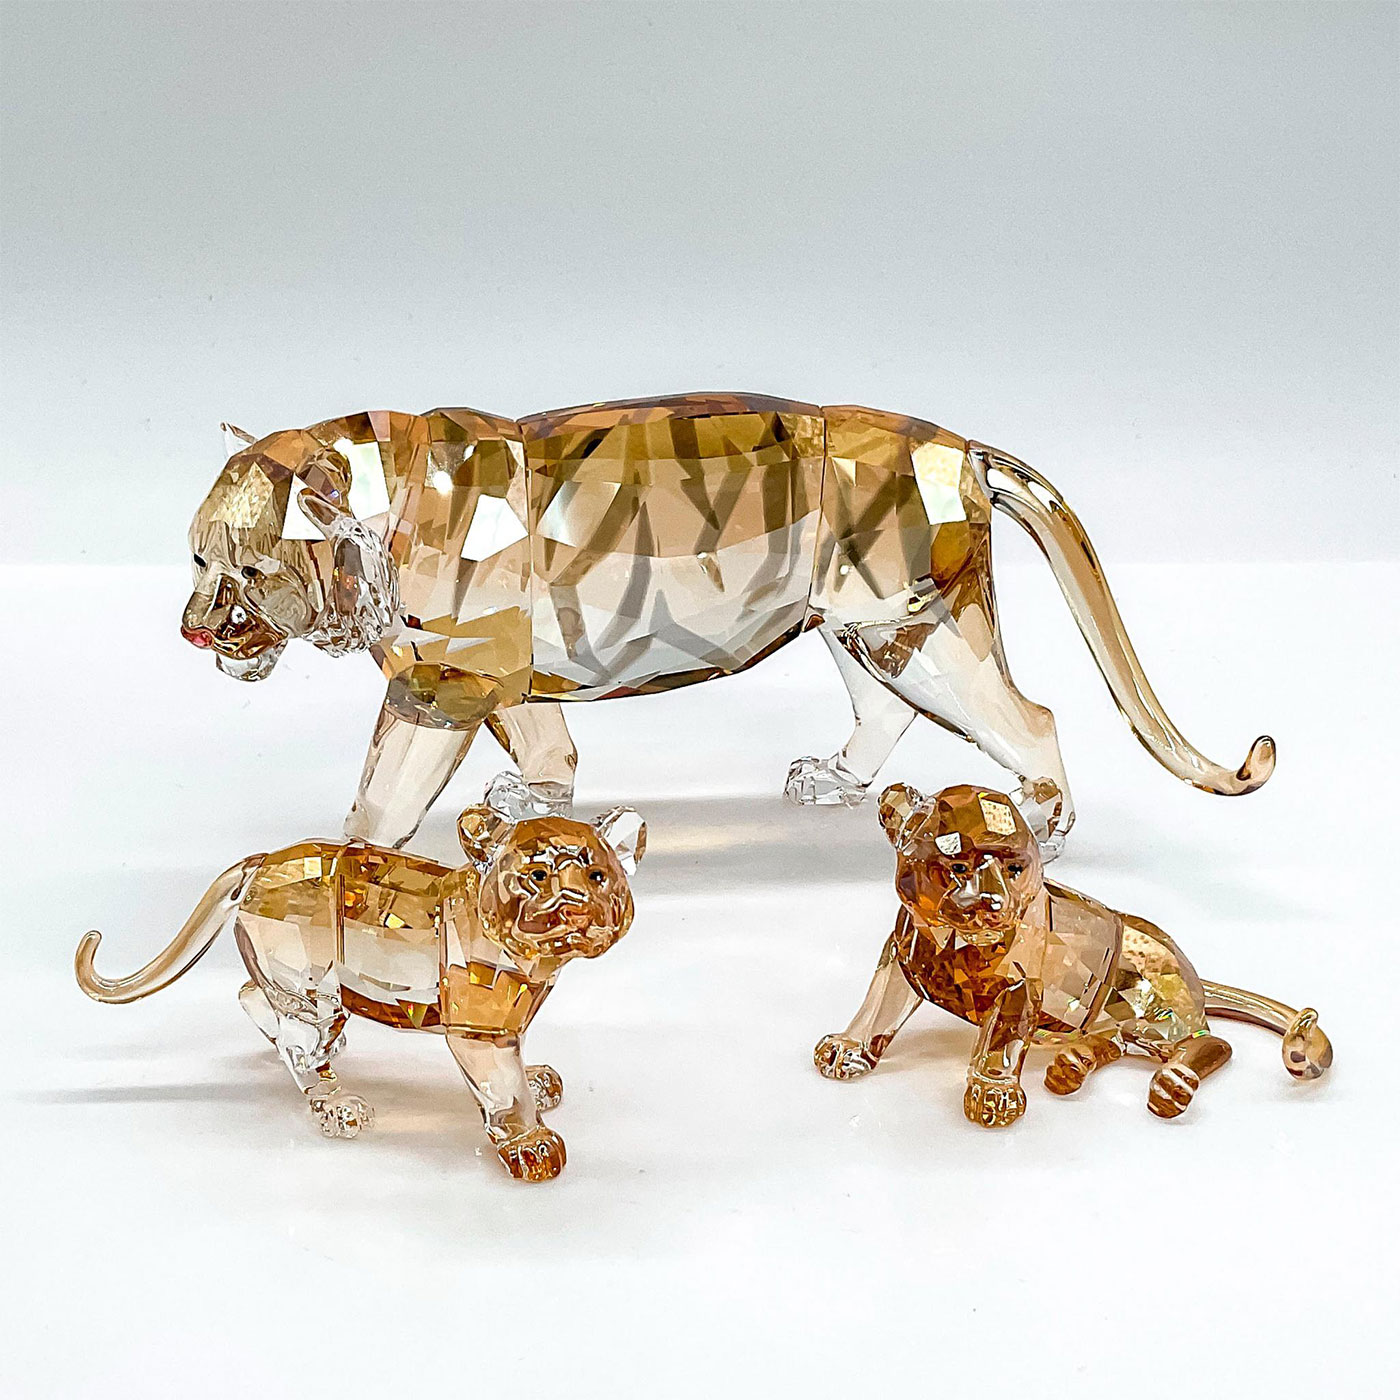 3pc Swarovski Crystal Figurines, Tiger 1003148 and Cubs | Lion and 